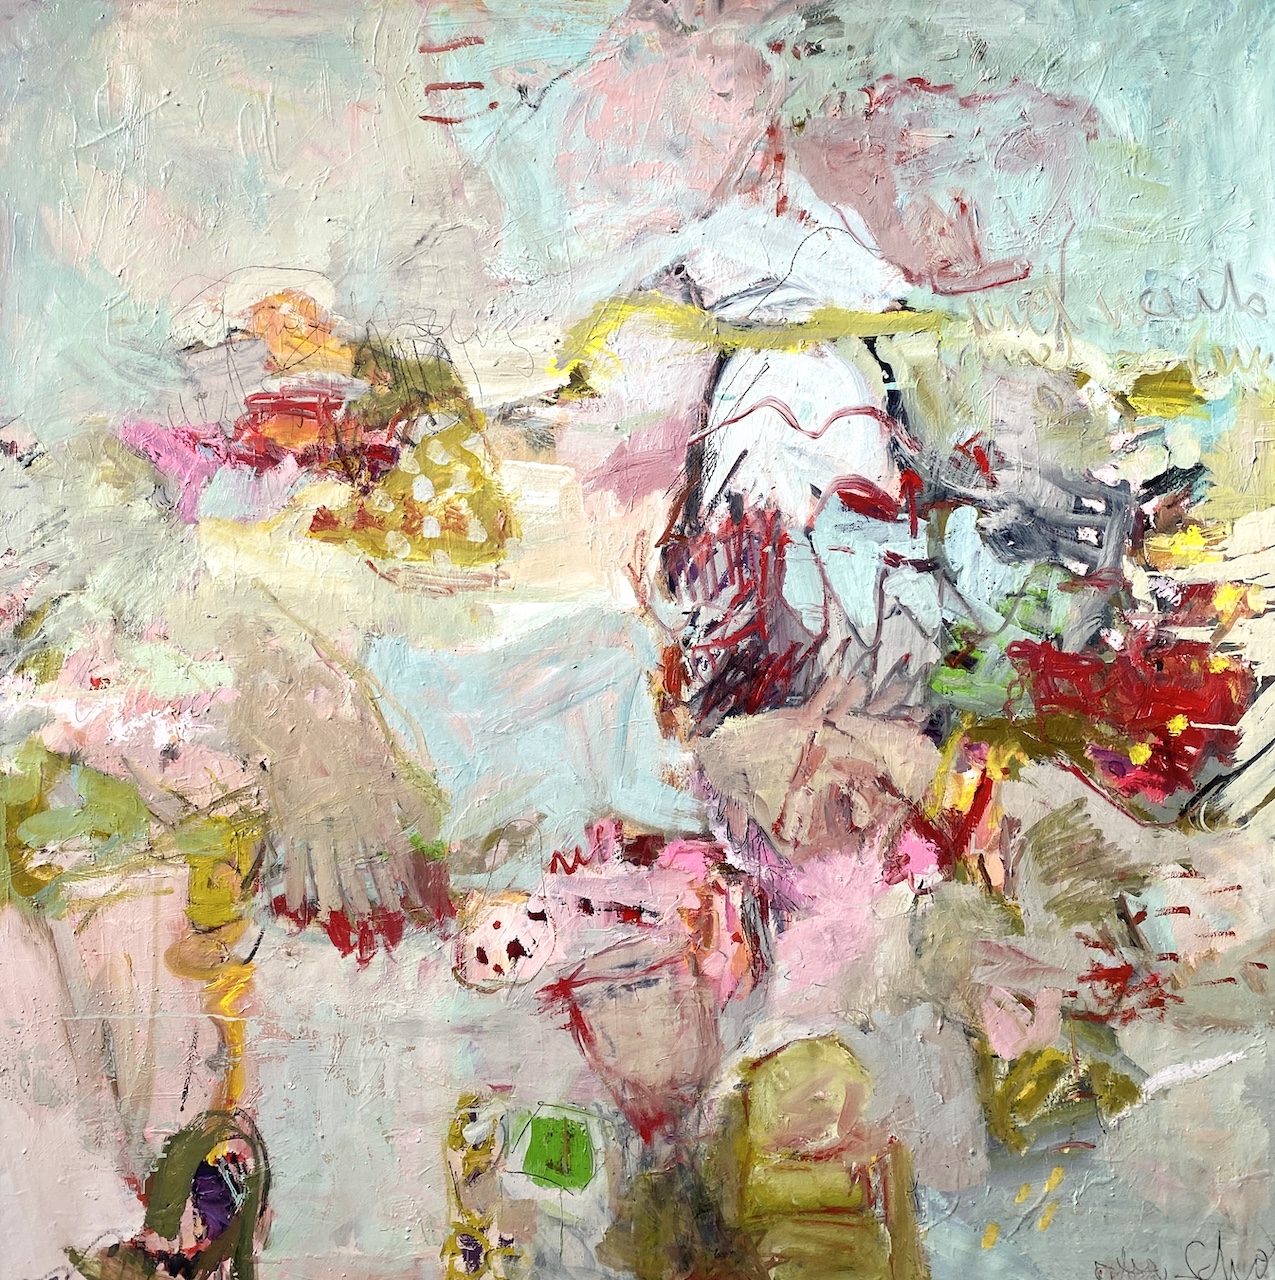 'Must Paint My Fingernails And Then A Glass Of Wine', Petra Schott, Oil and oil sticks on canvas, 120 x 120 cm